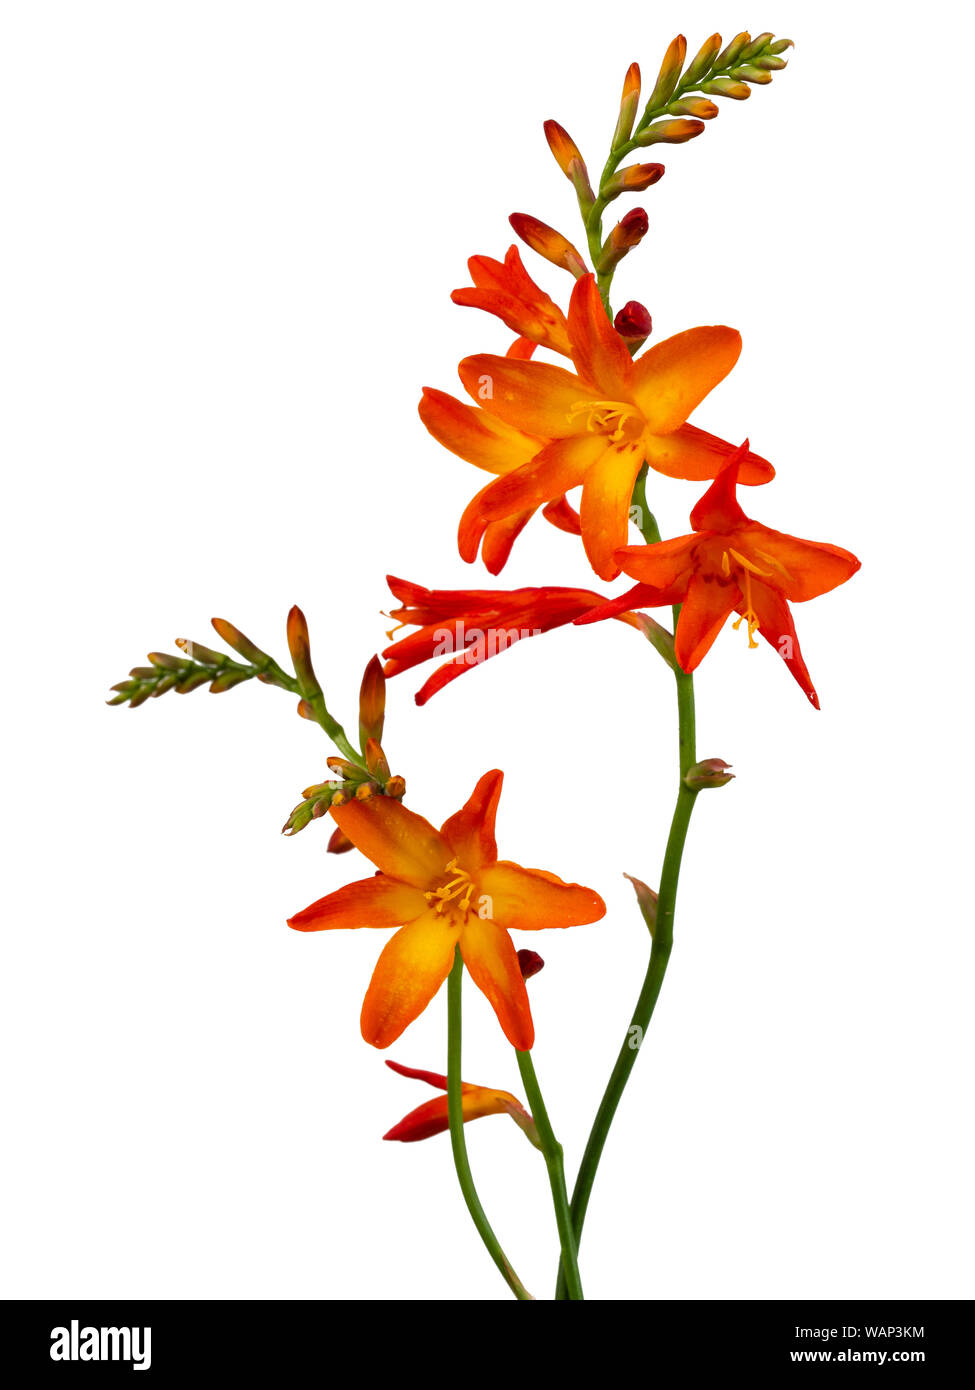 Single stem with flower spikes of the late summer flowering montbretia, Crocosmia x crocosmiiflora, on a white background Stock Photo